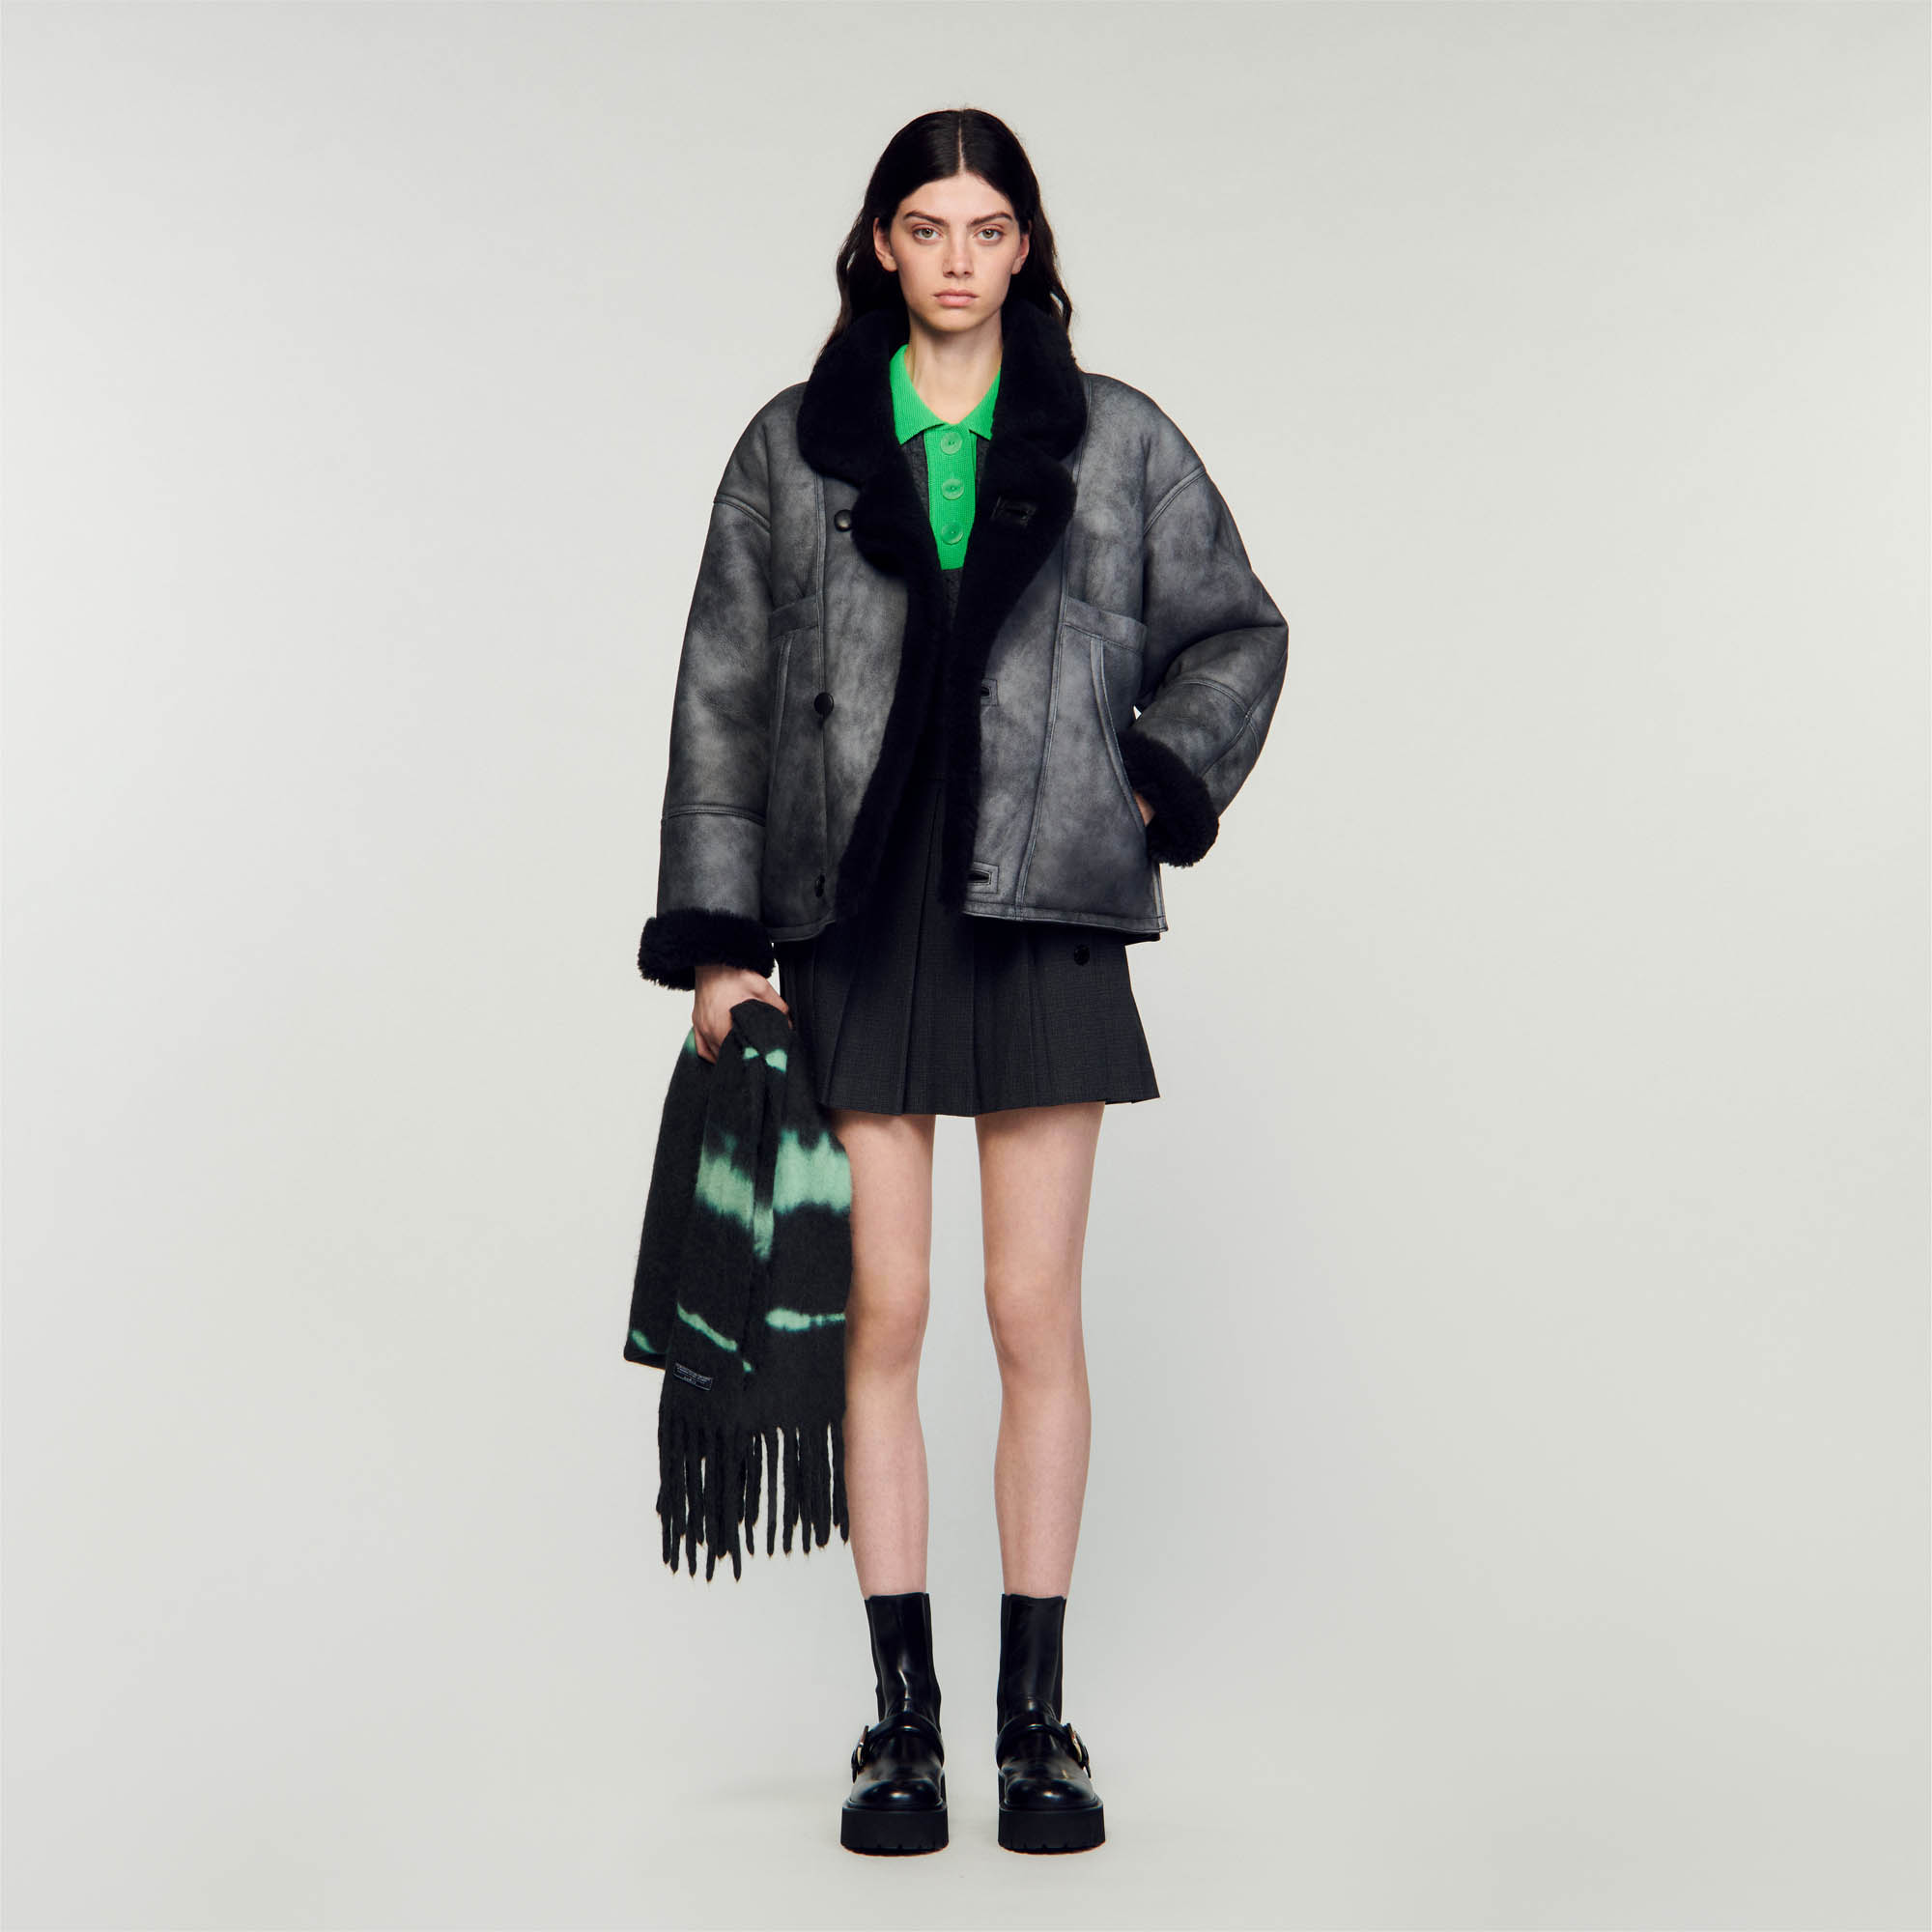 Sandro shearling Leather: Oversized coat in vintage-effect woolen shearling, with a lined interior and wide fur collar, long sleeves, a double breasted front that fastens with buttons and side pockets